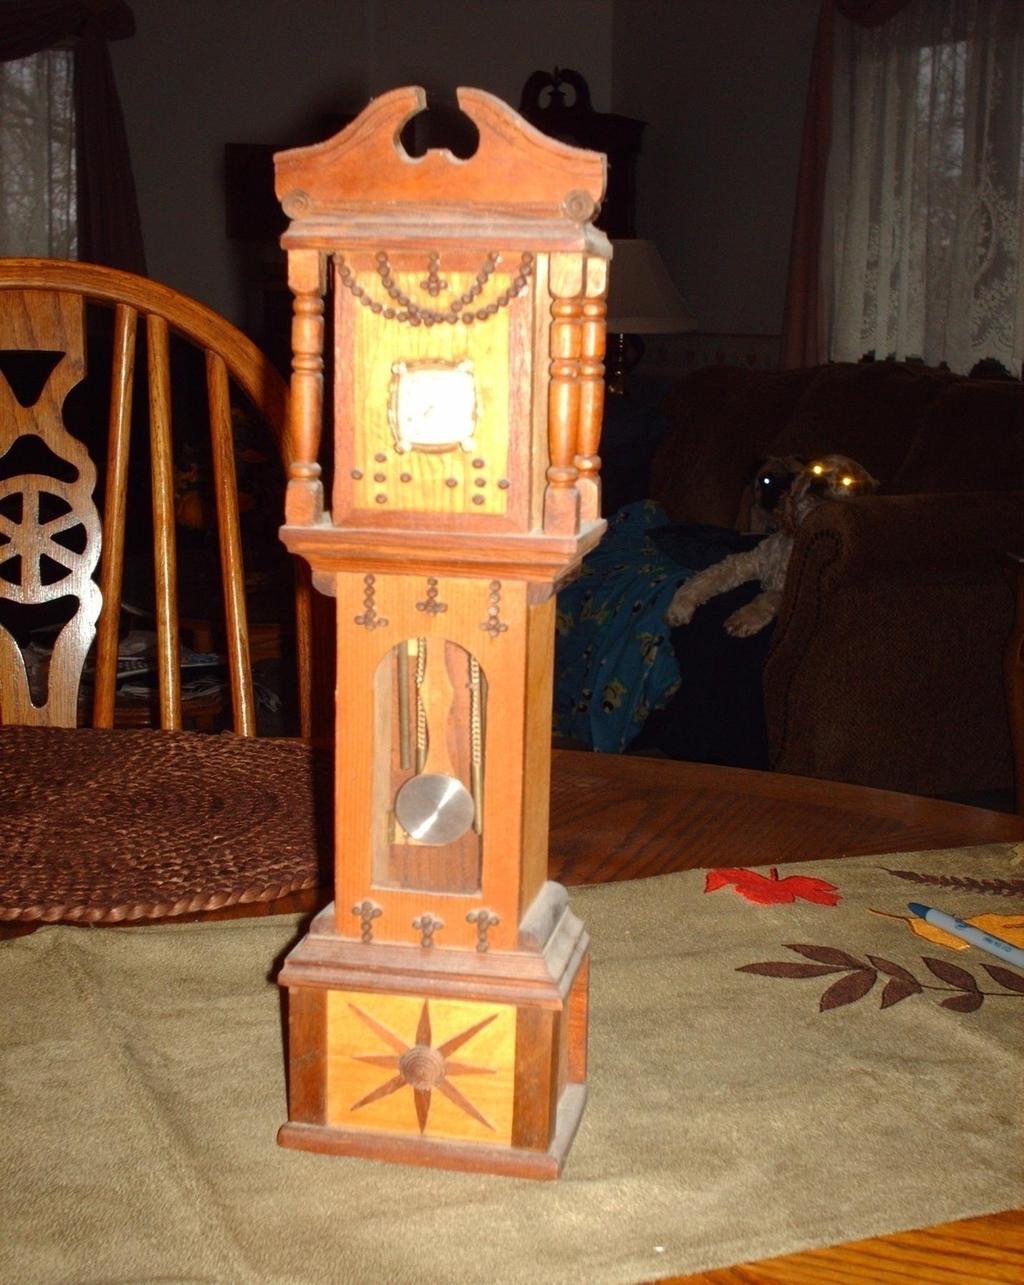 Owner Larry Wise (grandson) Size 14 High x 4 Wide This miniature grandfather clock was made with